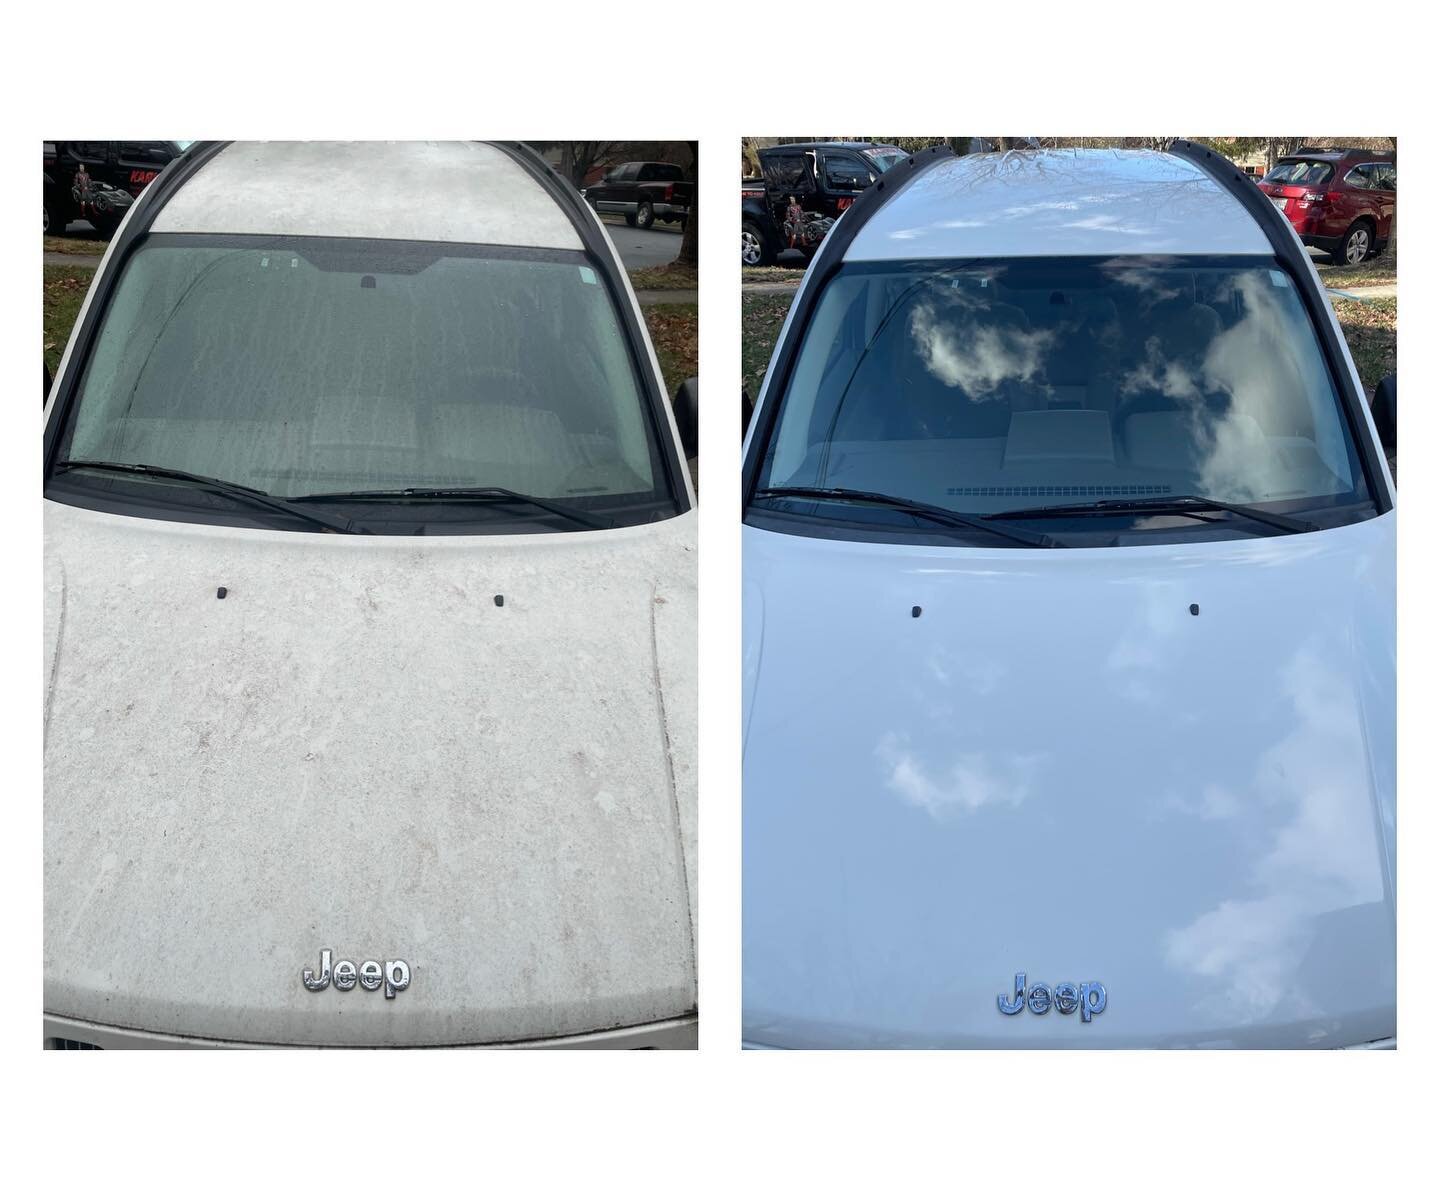 Woahhhh! 🤯 Now that&rsquo;s what you call a &ldquo;Night 🌚 and Day 🌞 difference&rdquo;!
Revitalizing your vehicle inside and out with a new sunshiny look, just in time for Spring.🌷
Karma&rsquo;s Auto Care, LLC brings the magic to you 🪄, wherever